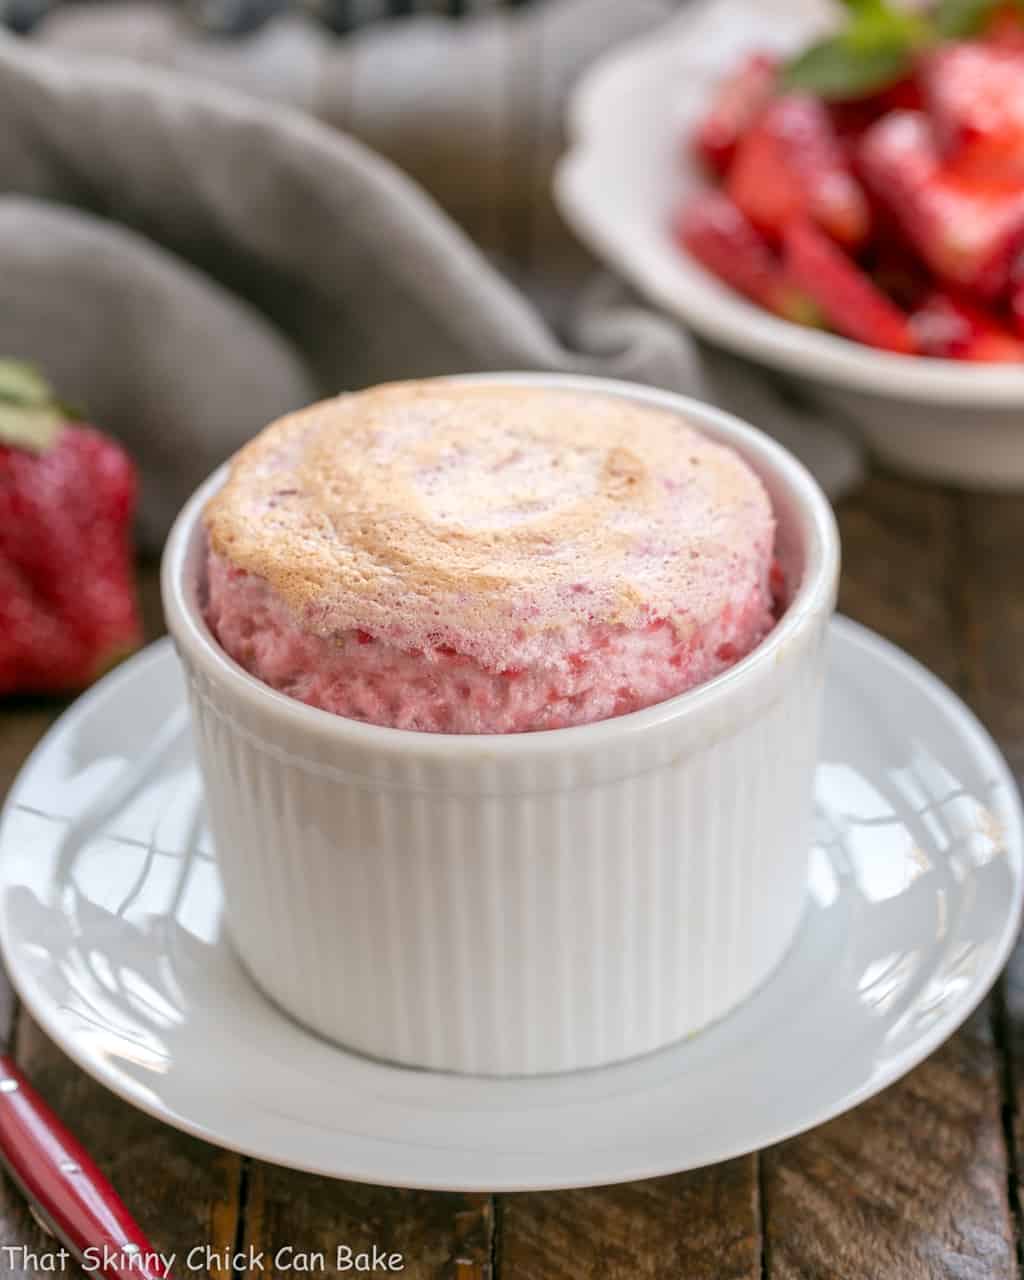 A baked strawberry souffle fresh out of the oven on a white plate.